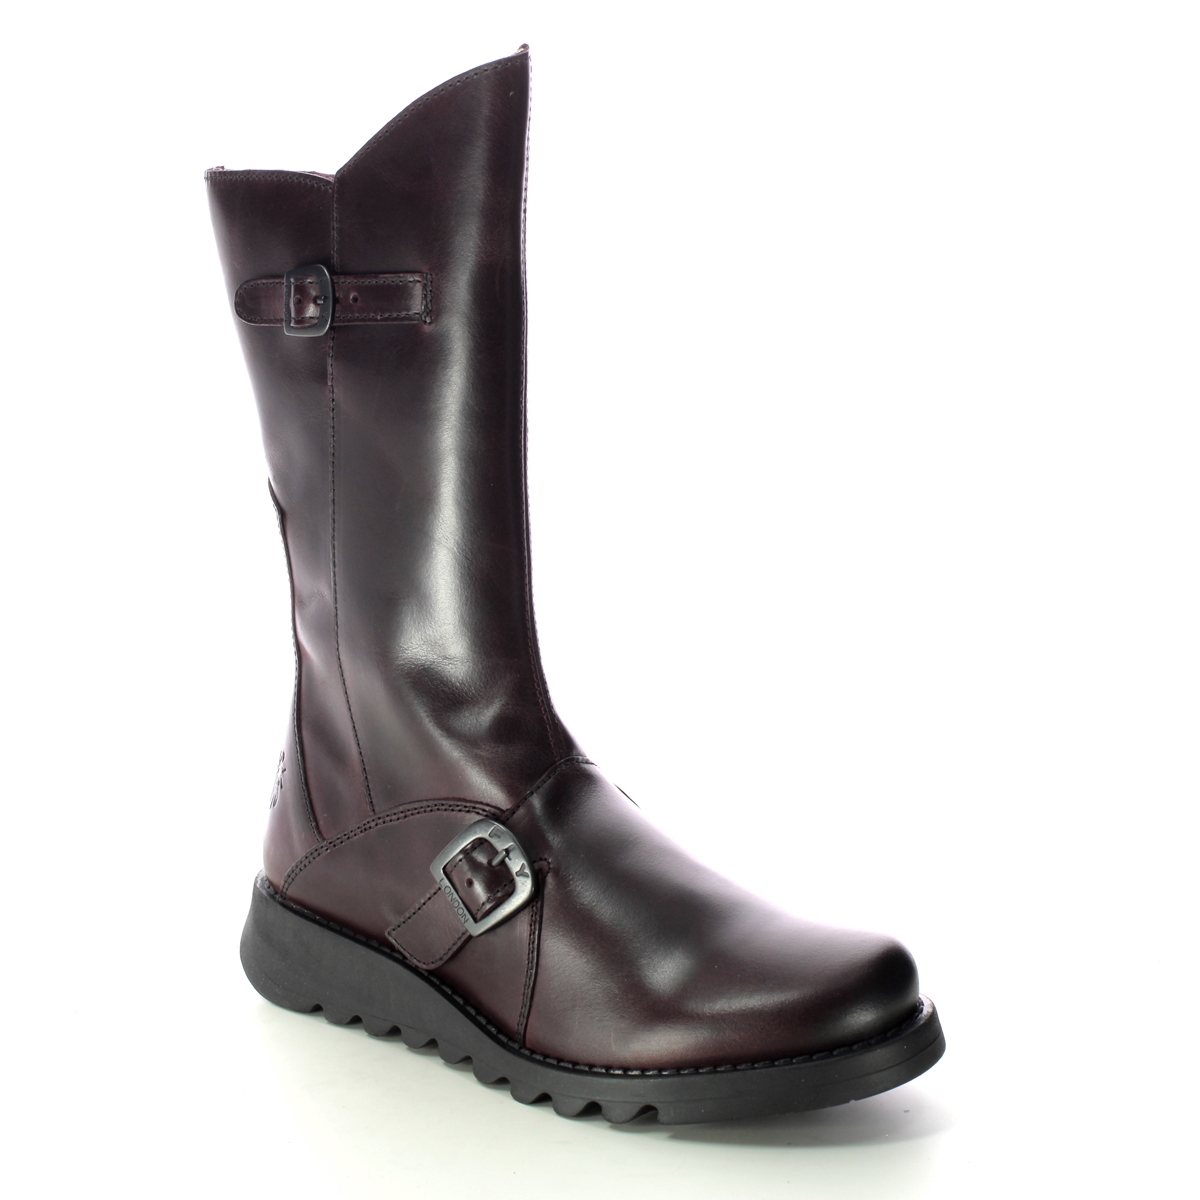 Fly London Mes 2 Wine Leather Womens Mid Calf Boots P142913 In Size 40 In Plain Wine Leather